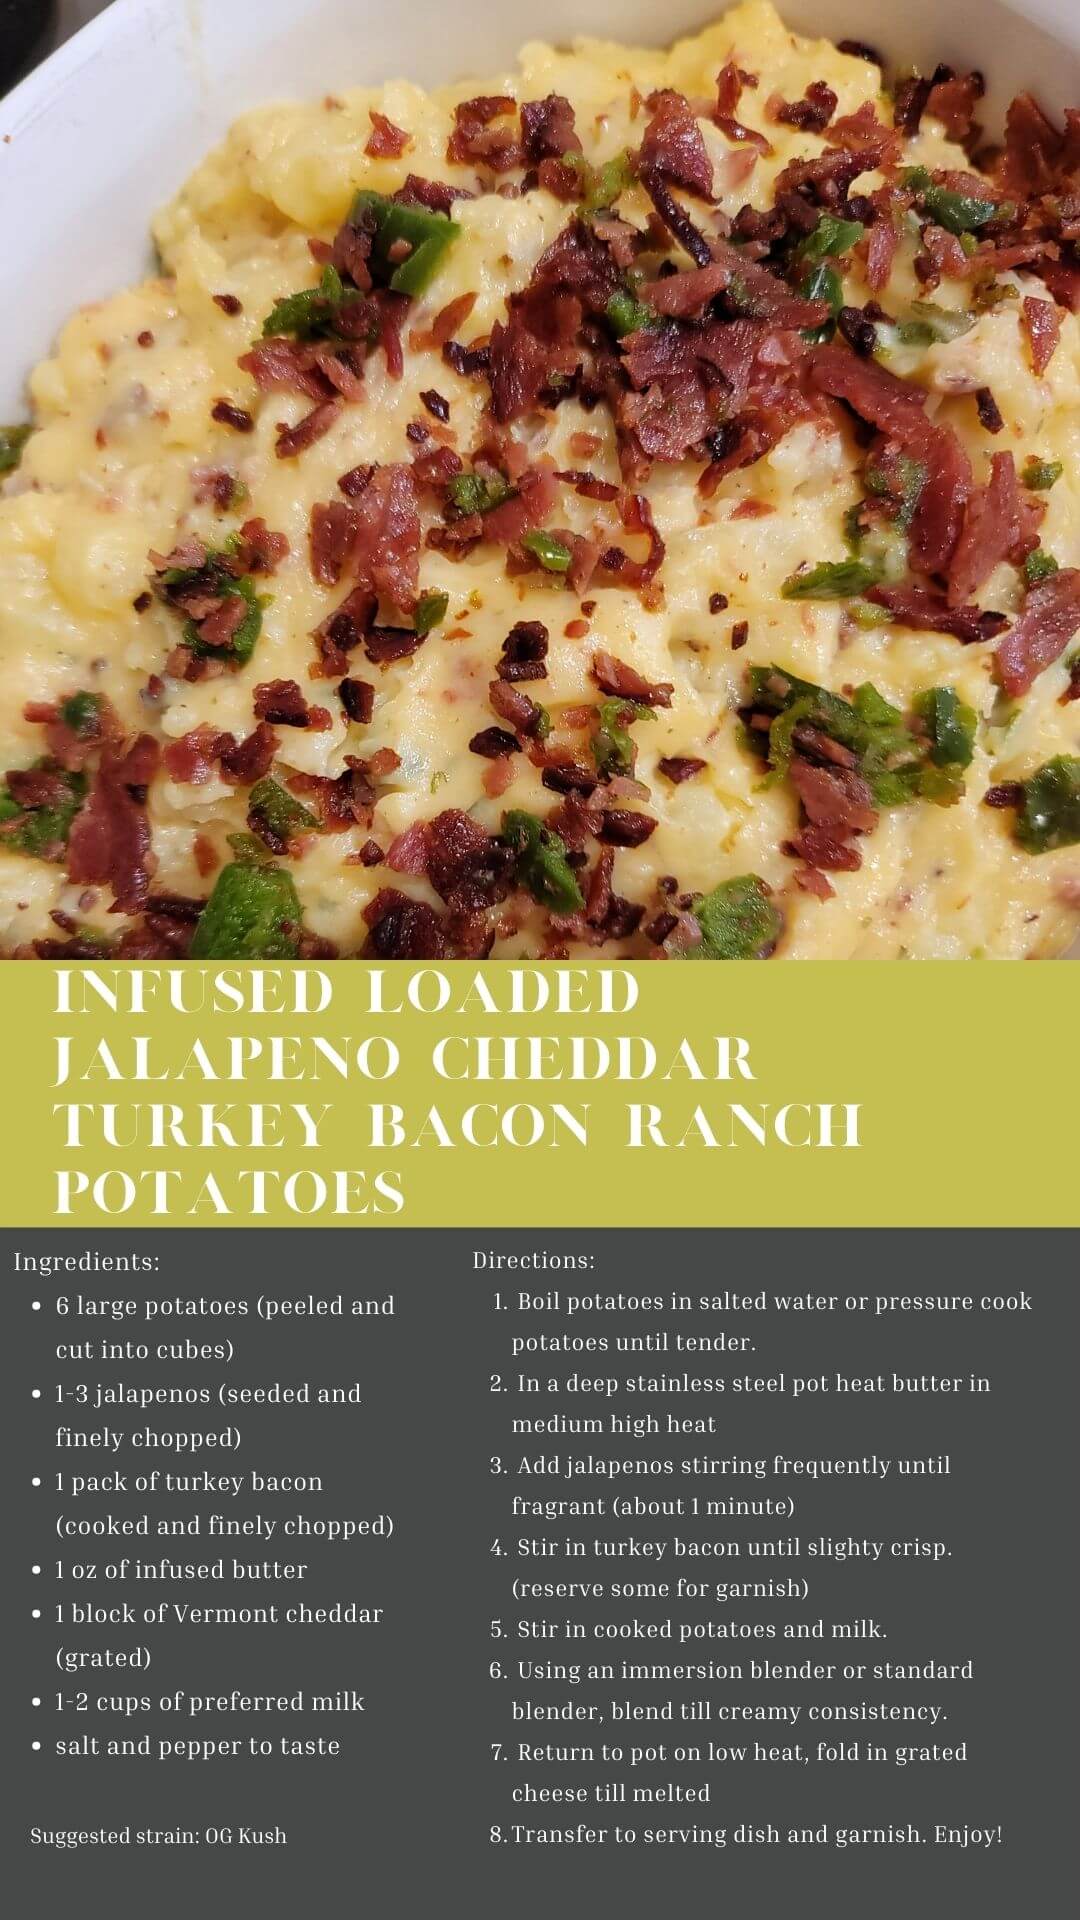 infused loaded jalapeno cheddar turkey bacon ranch potatoes recipe